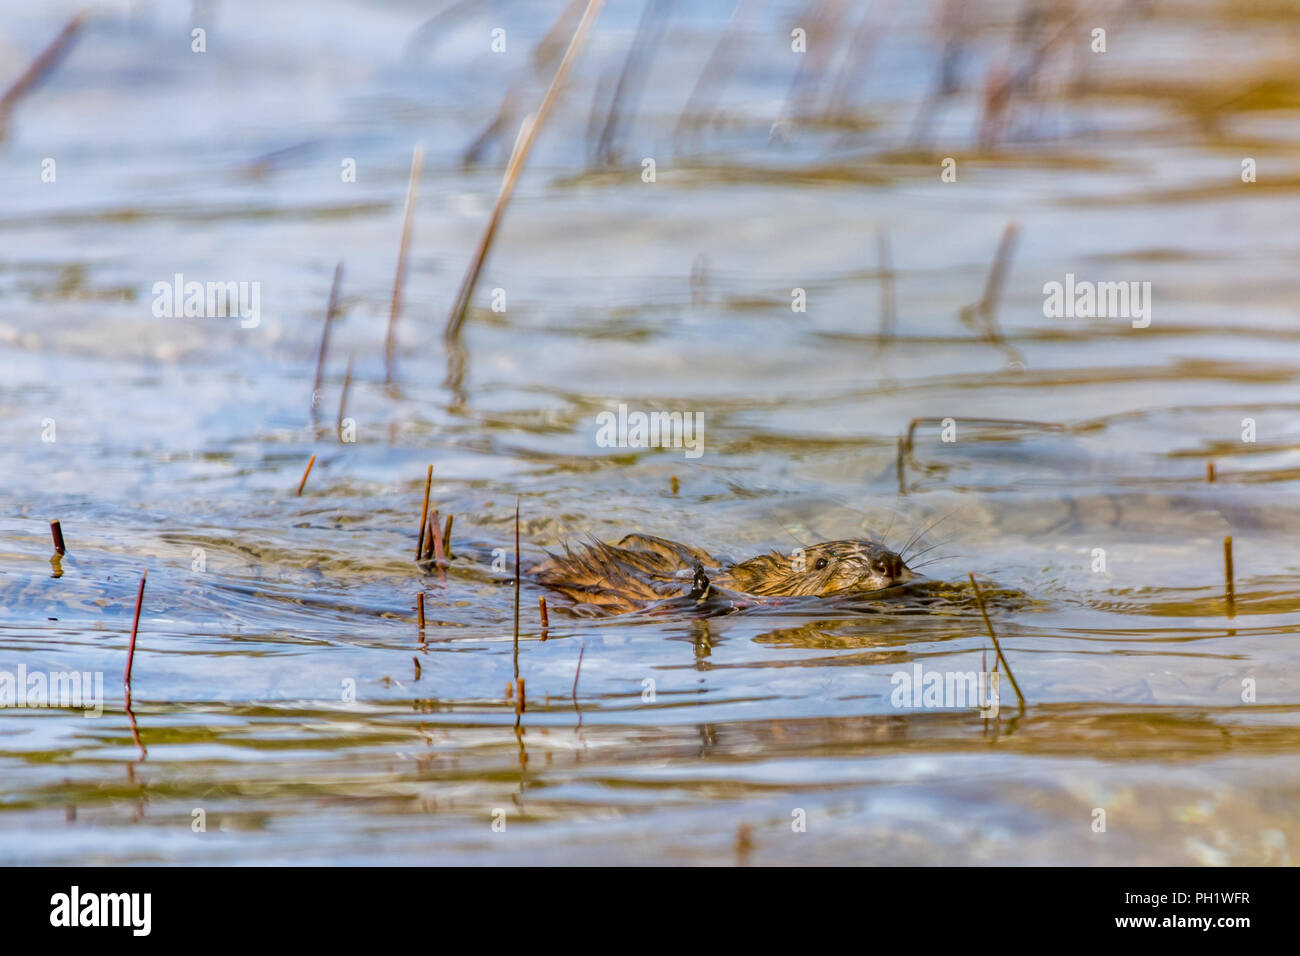 Muskrat (Ondatra zibethicus) swimming carrying a stick. Stock Photo